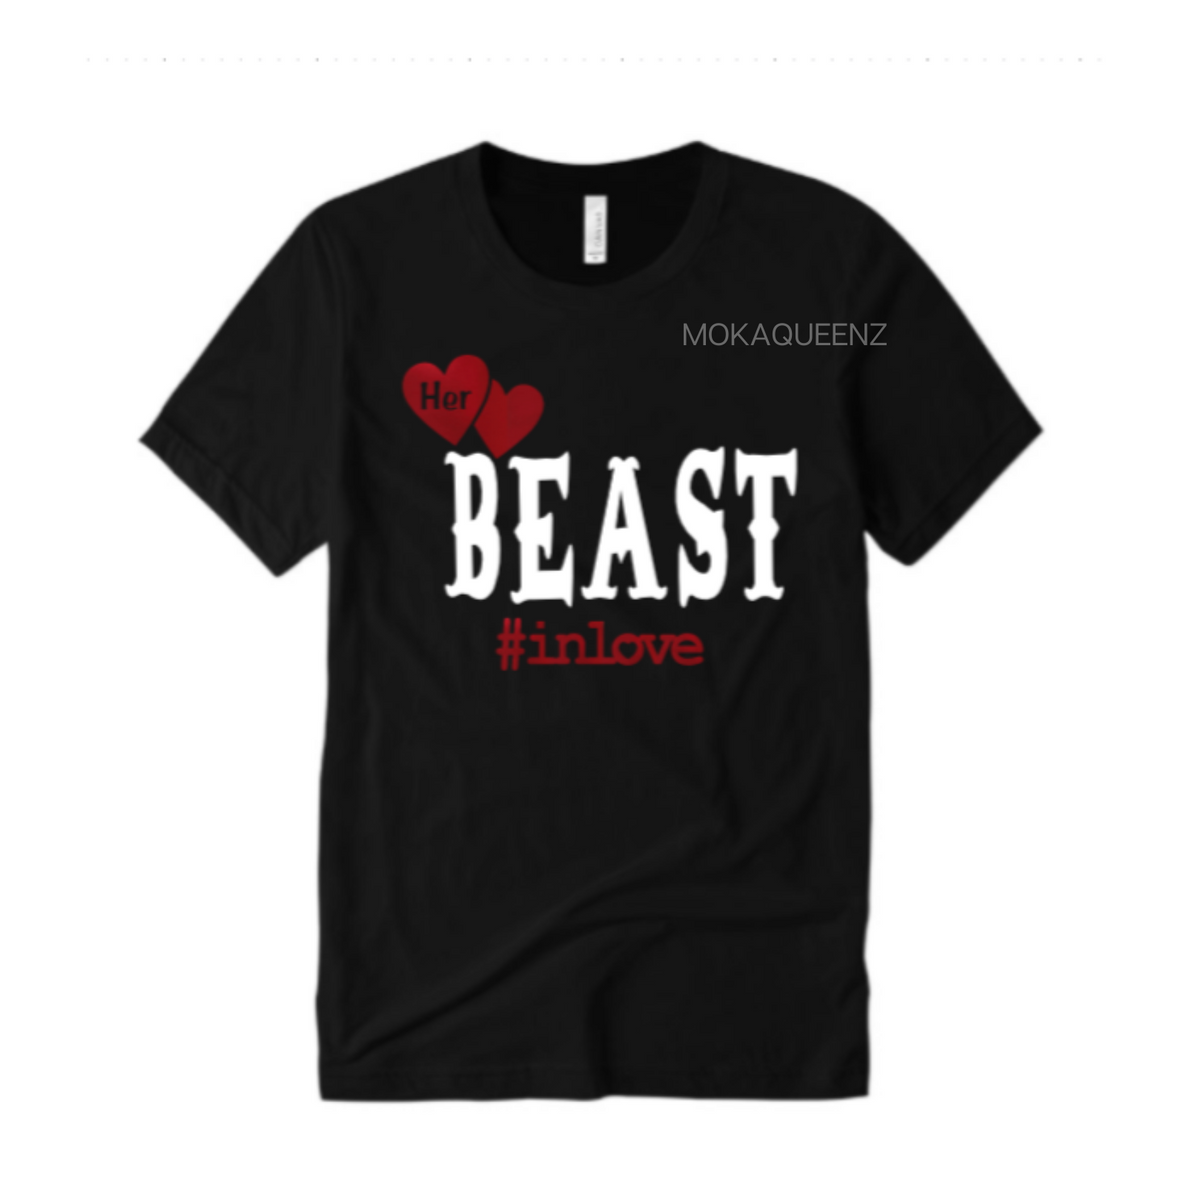  Beast Beauty Custom Jerseys for Couples - His and Her Matching  Couple Shirts Men Black - Women Black : Clothing, Shoes & Jewelry